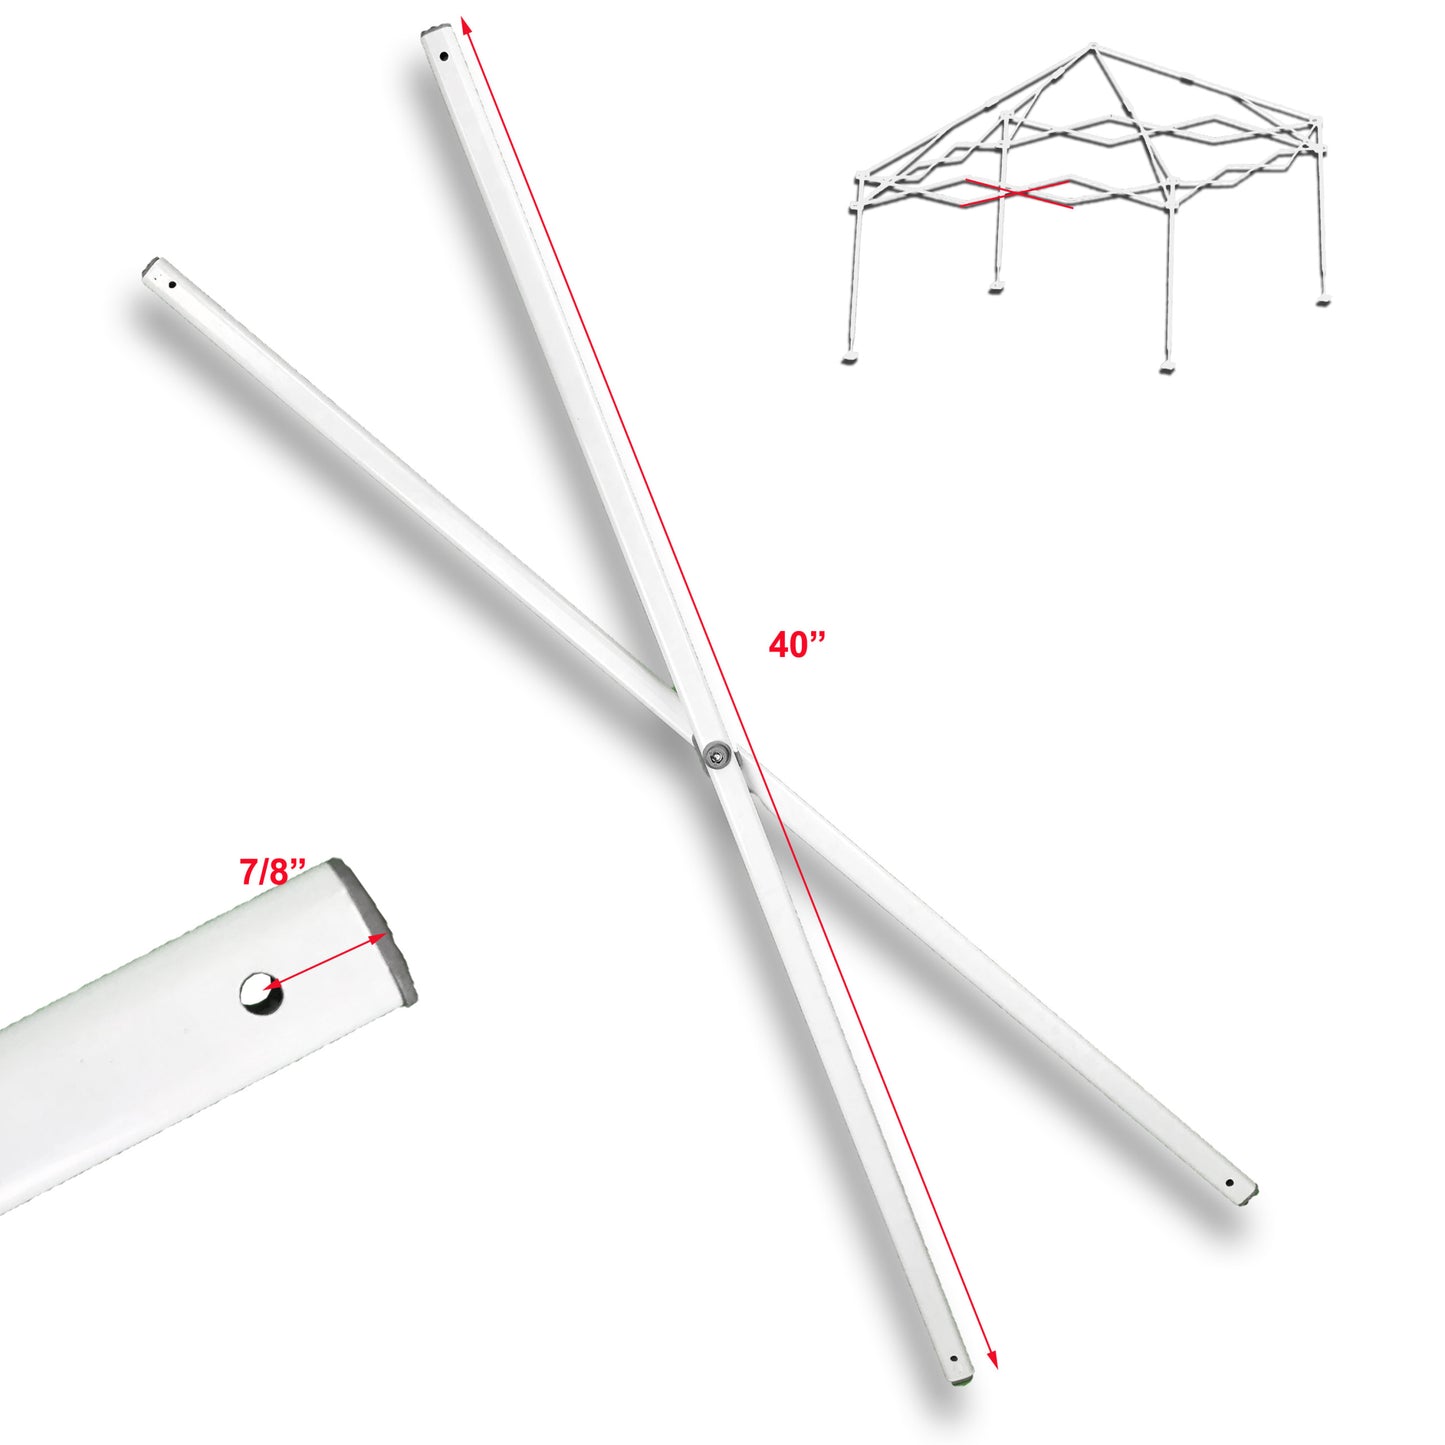 This photo features the E-Z UP Envoy 10' X 10' Instant Canopy Gazebo Middle TRUSS Bar Replacement Part, with the dimensions conveniently displayed in the image, measuring 40 inches in length. This replacement truss bar is an essential component for maintaining the structural integrity and stability of your canopy. It plays a critical role in ensuring that your canopy remains secure and functional during outdoor events and gatherings.